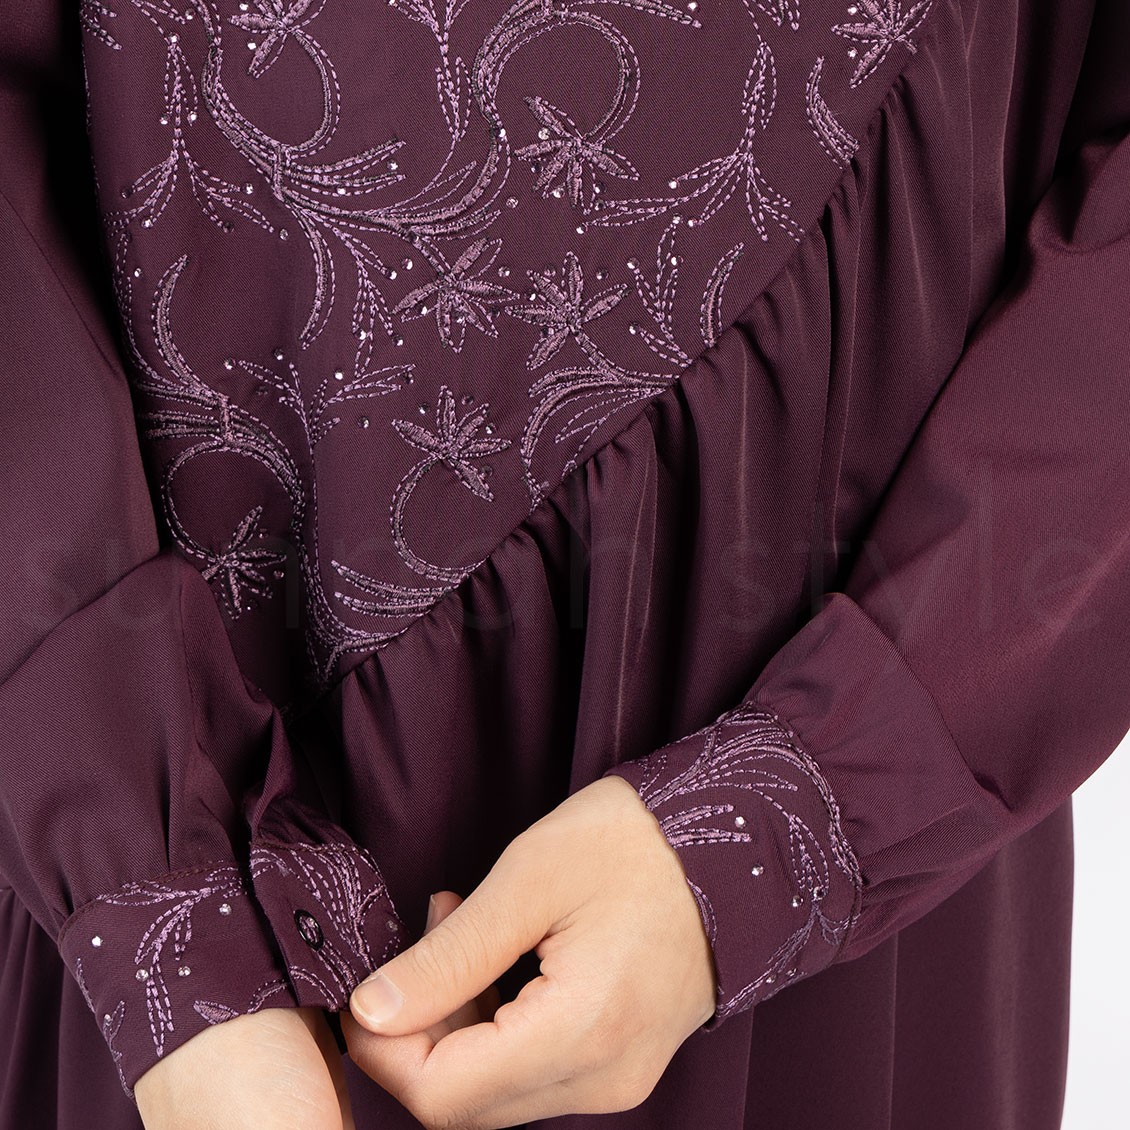 Sunnah Style Girls Floral Umbrella Abaya Mulberry Embroidered